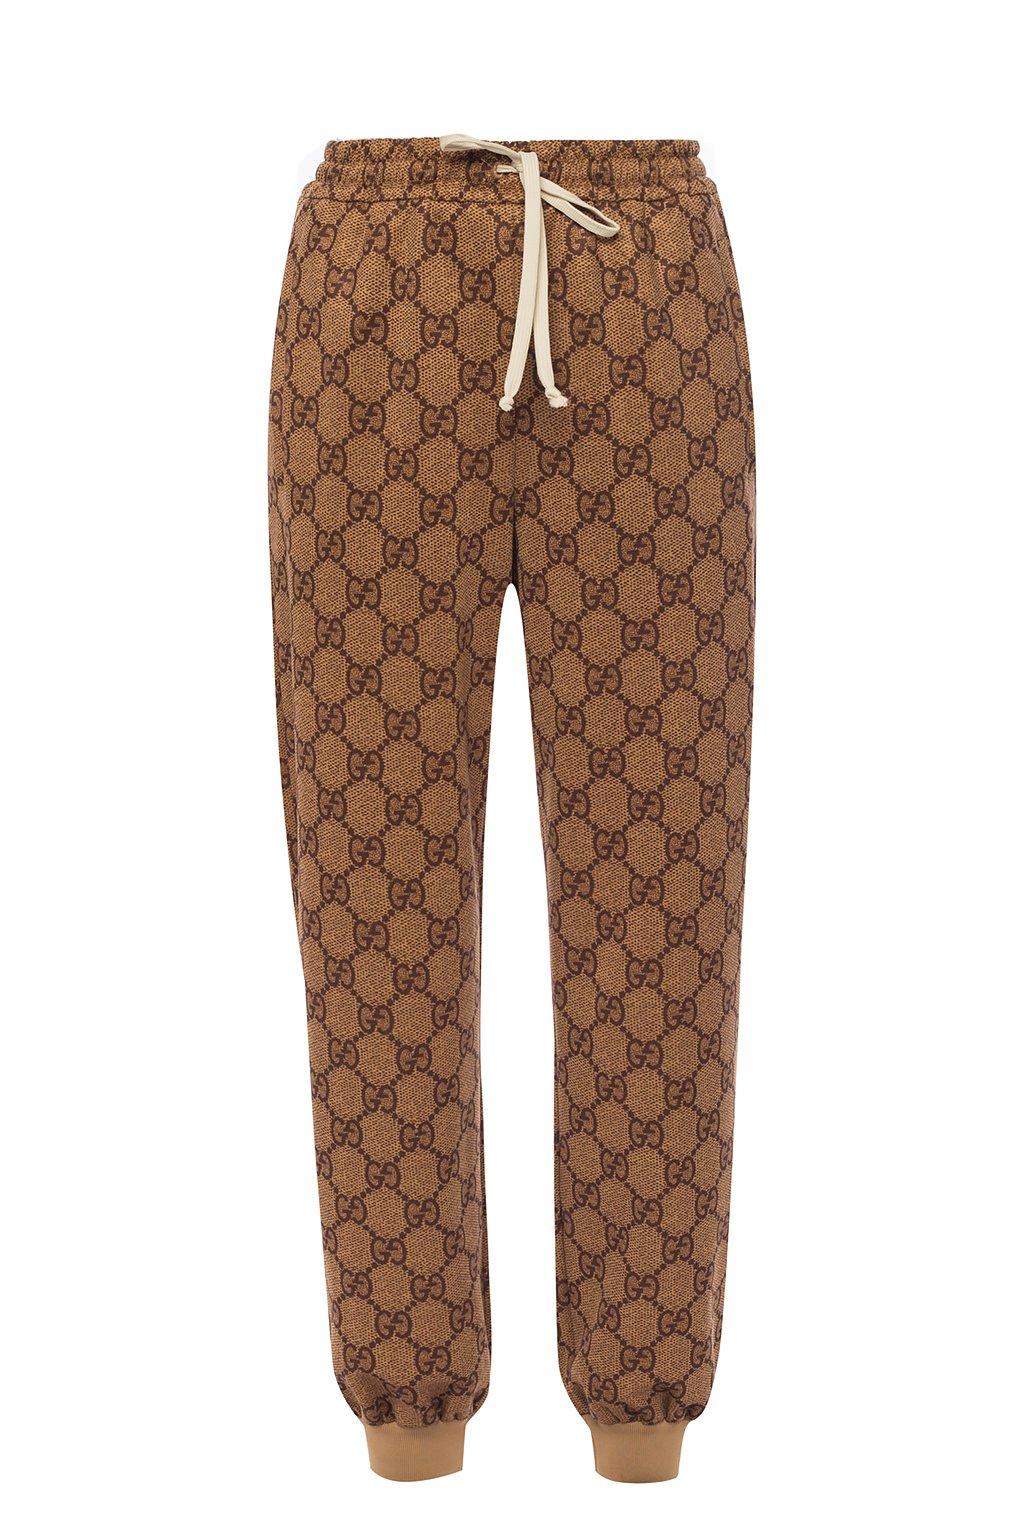 Gucci Logo-patterned jogging Pants in Brown - Lyst